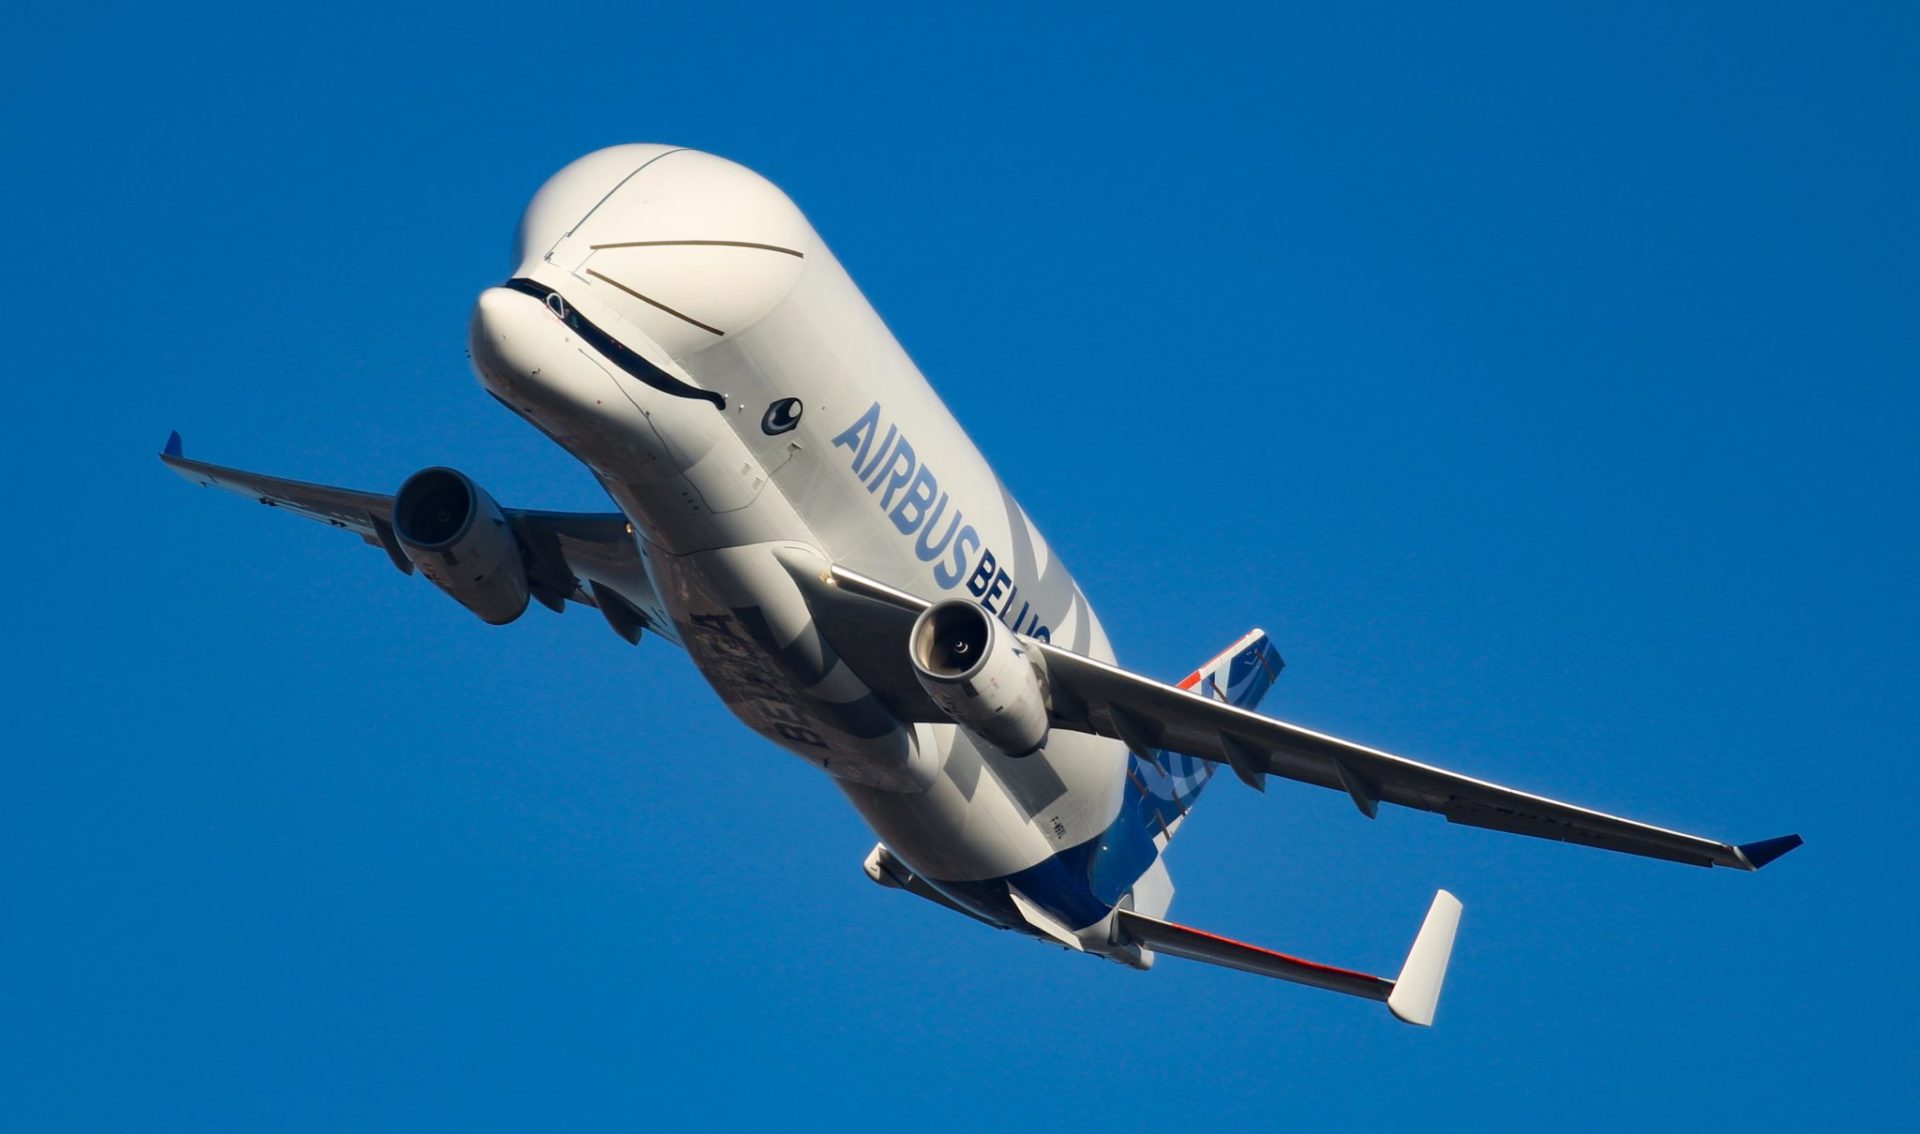 Airbus Beluga XL dips her wings in a nod to staff at Airbus Filton (Image: Aviation Media Co.)